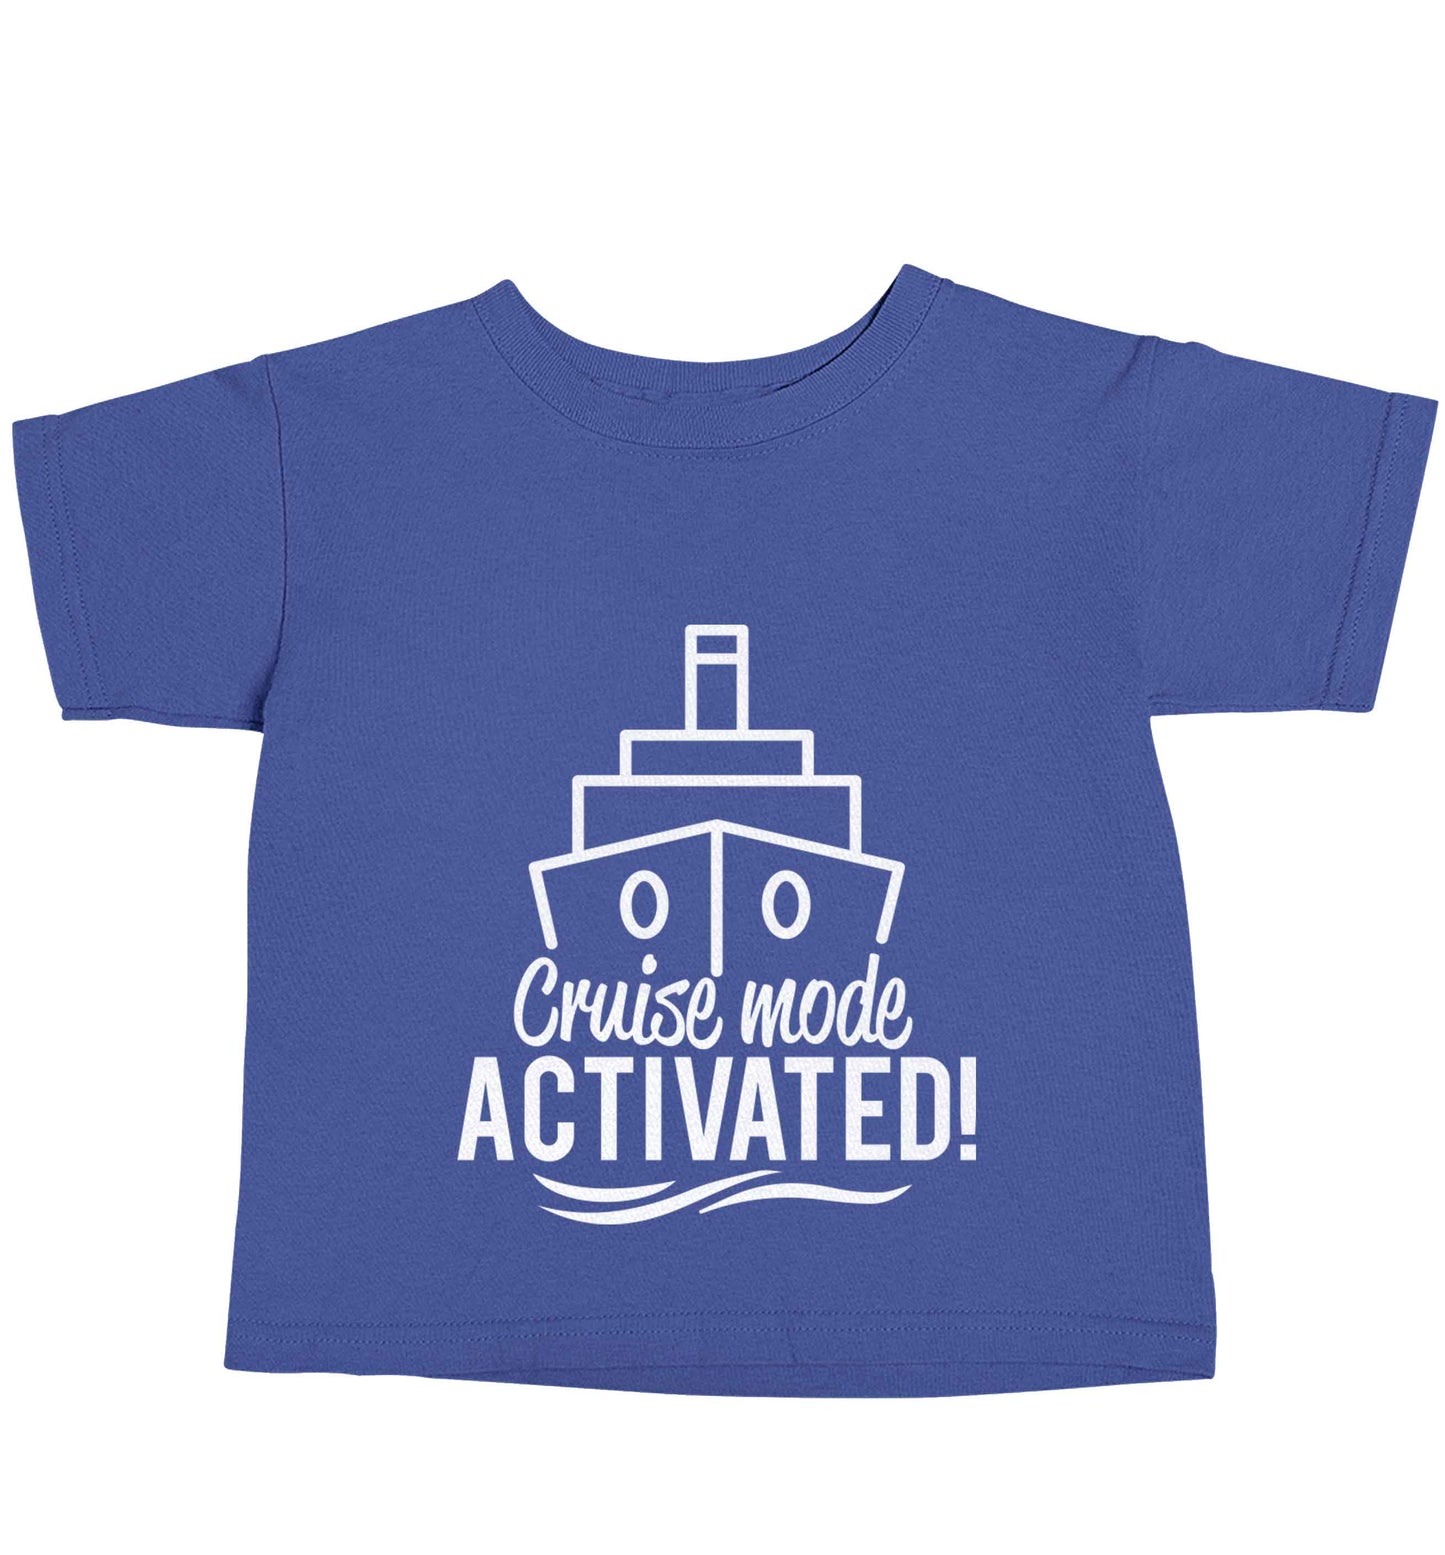 Cruise mode activated blue baby toddler Tshirt 2 Years